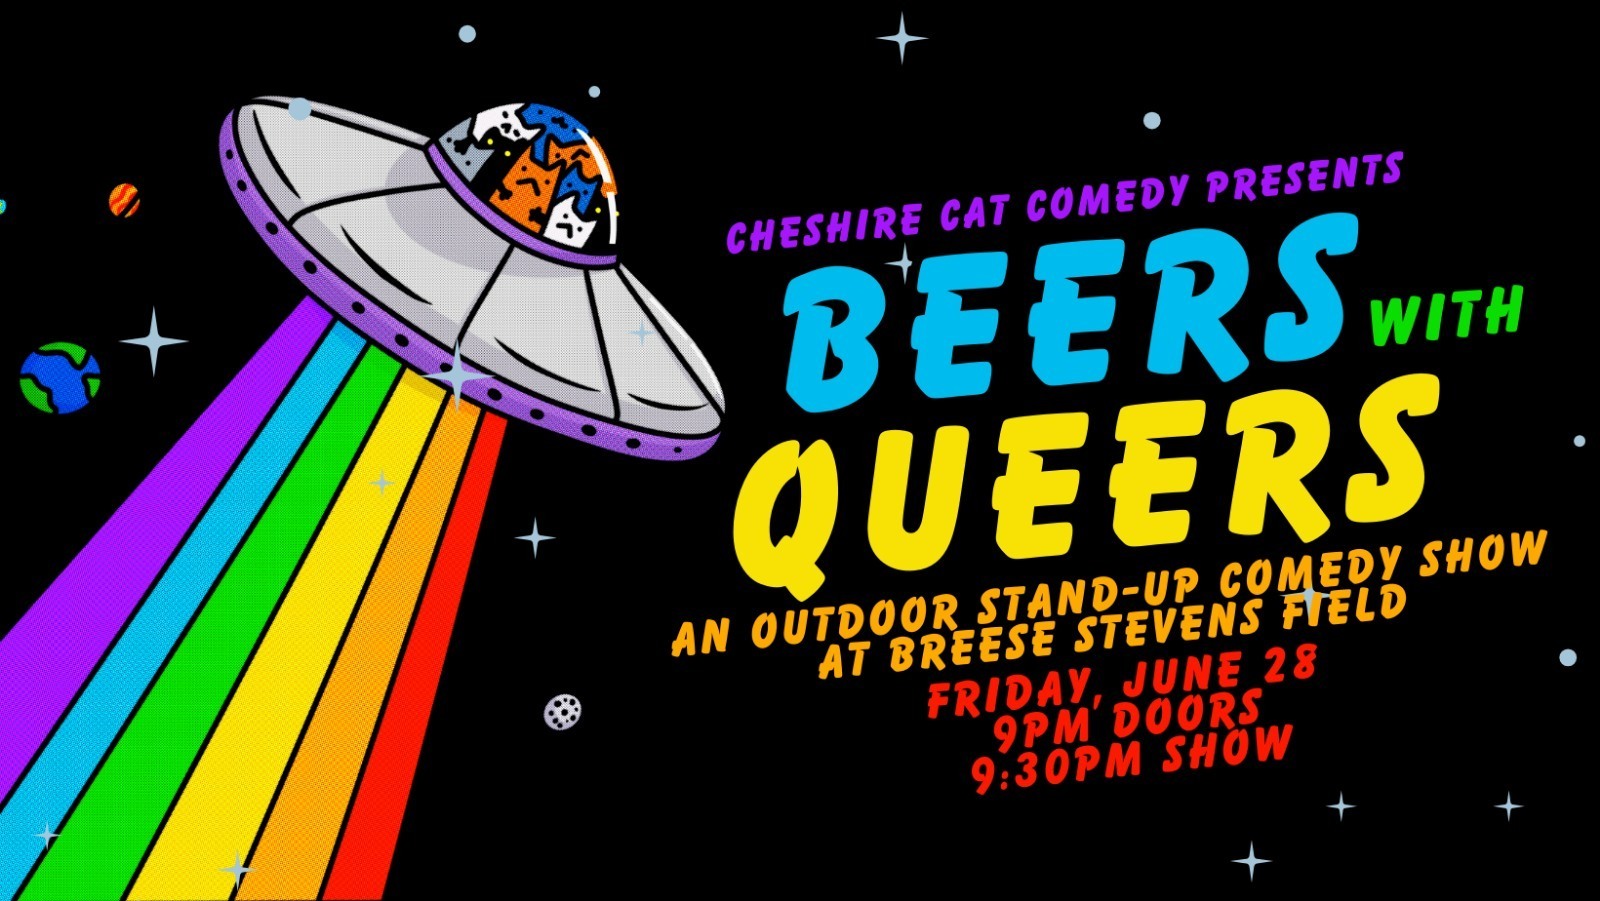 Beers with Queers, Madison, Wisconsin, United States